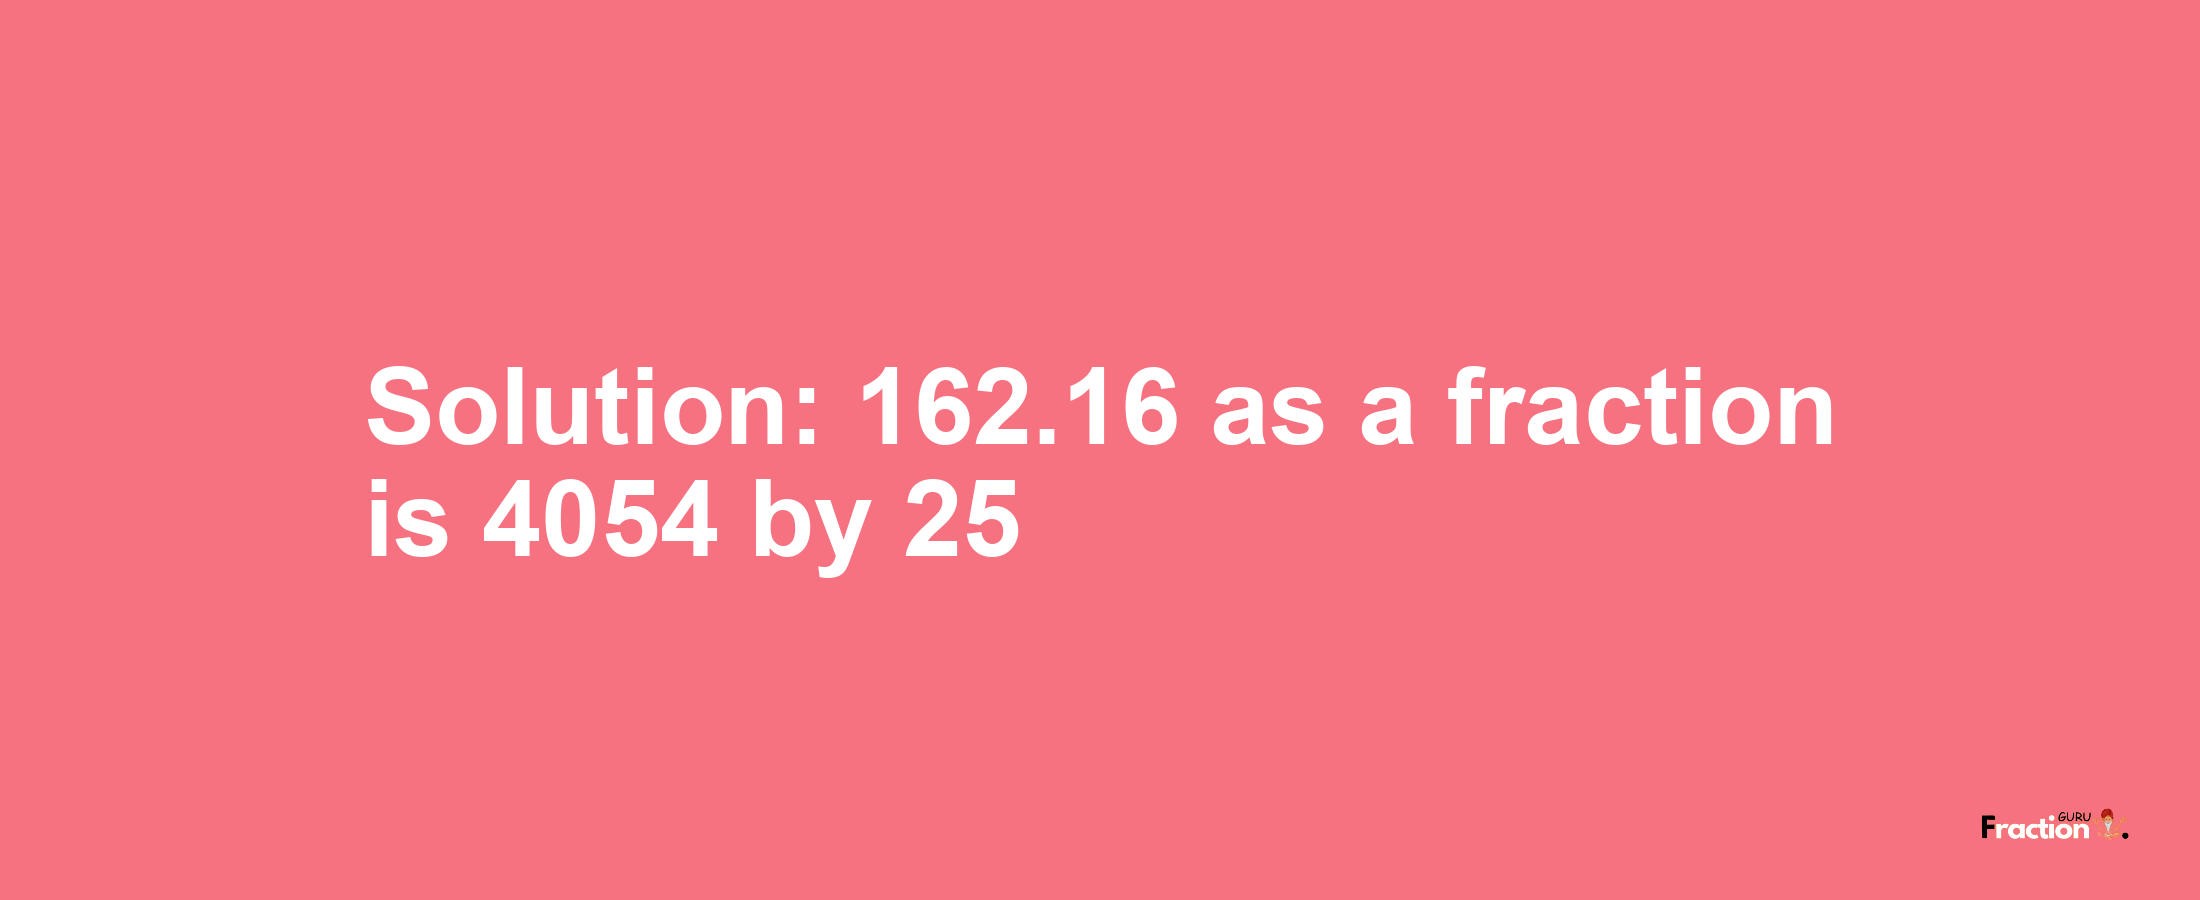 Solution:162.16 as a fraction is 4054/25